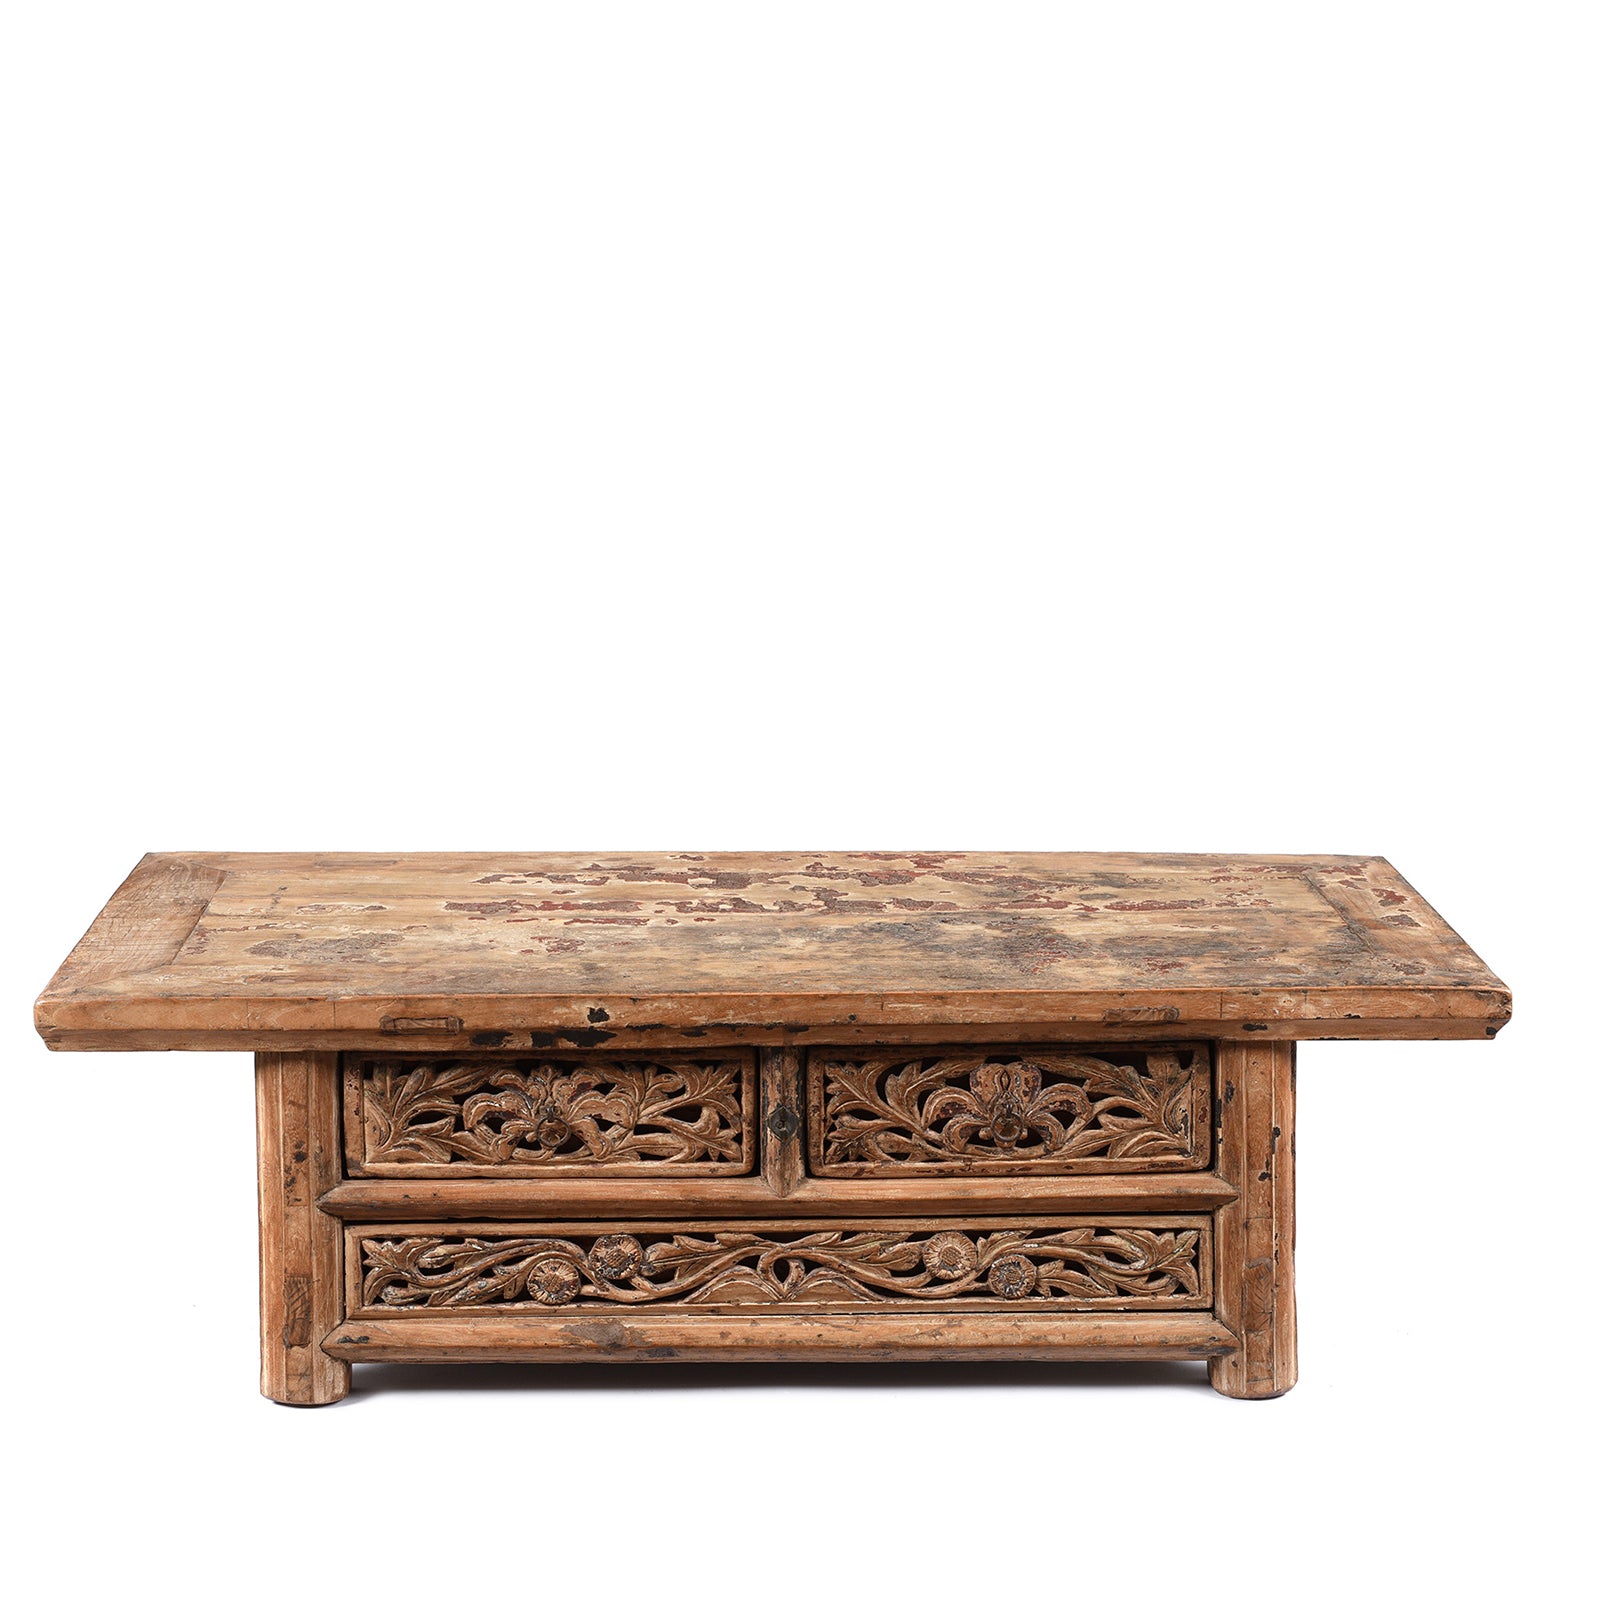 Bleached Elm Kang Table From Shanxi  - 19th Century | Indigo Antiques